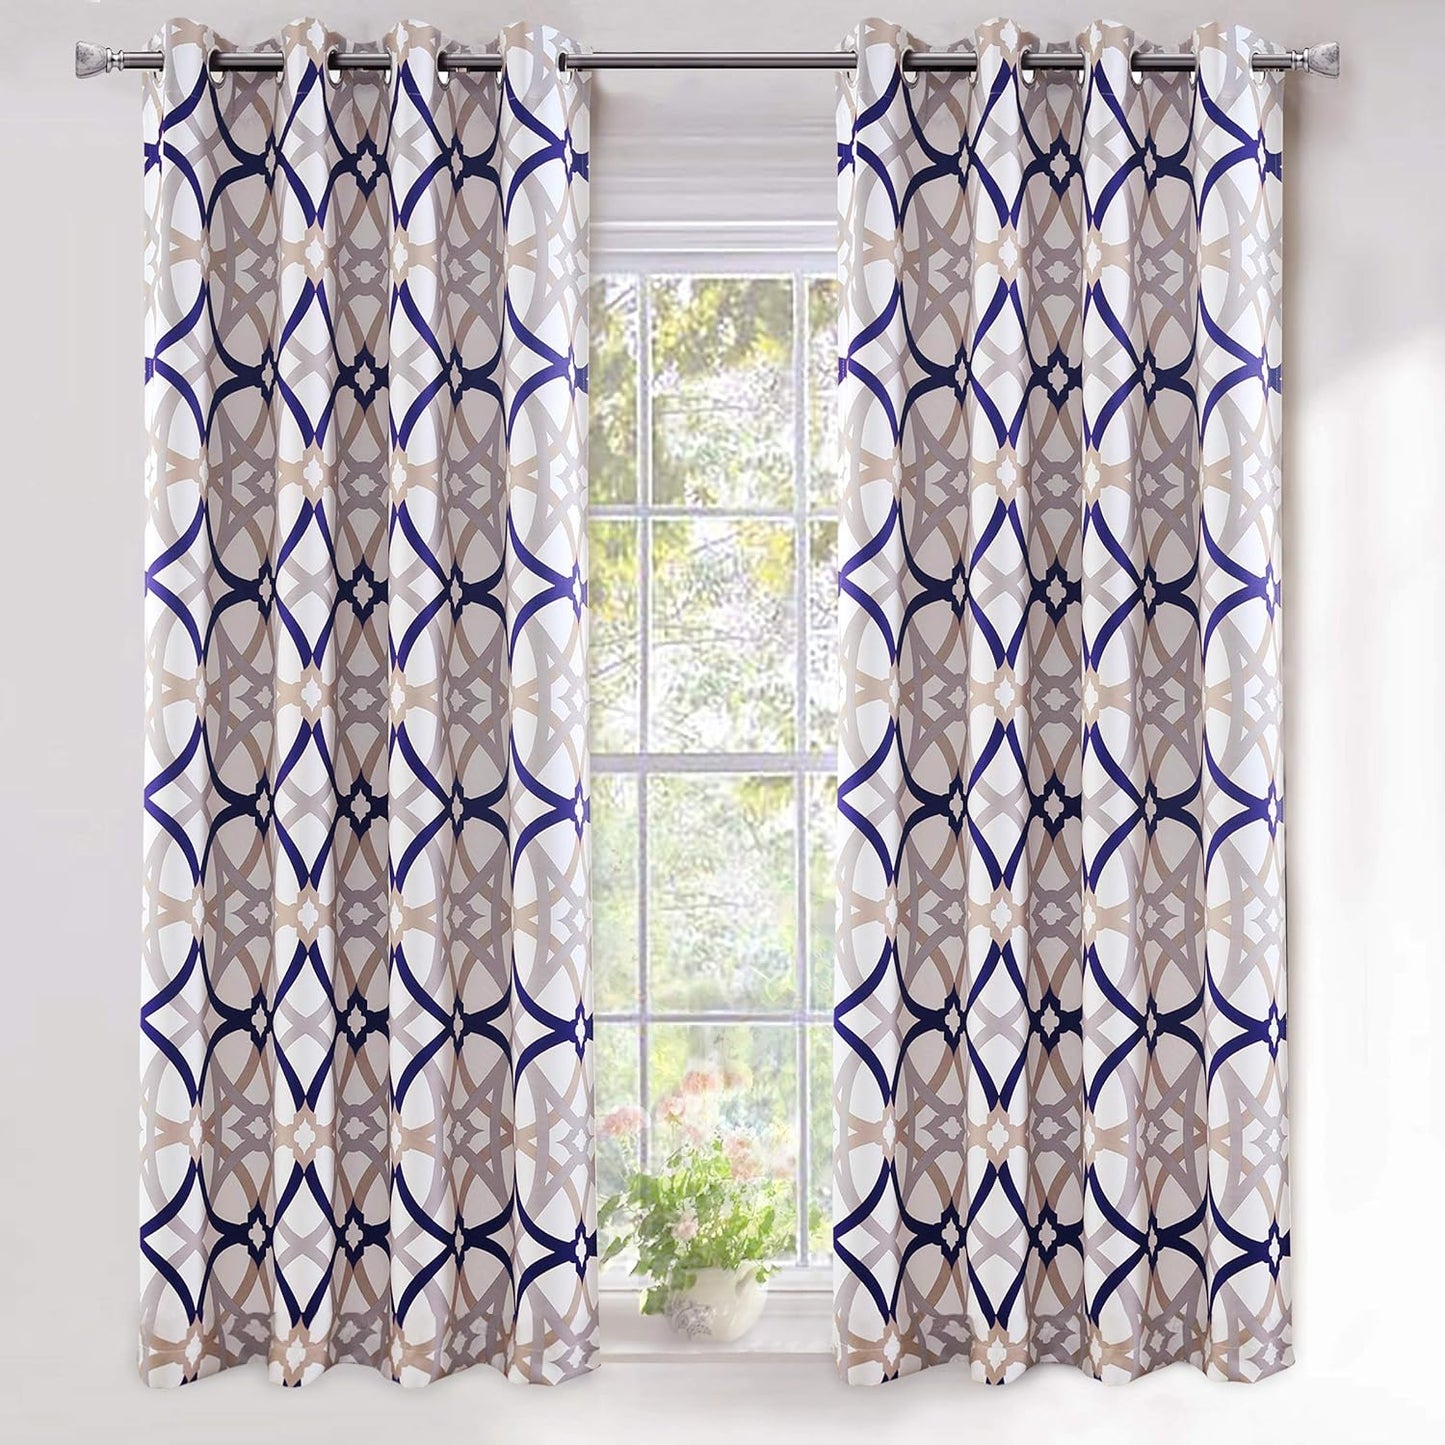 Driftaway Alexander Thermal Blackout Grommet Unlined Window Curtains Spiral Geo Trellis Pattern Set of 2 Panels Each Size 52 Inch by 84 Inch Red and Gray  DriftAway Navy/Gray 52"X63" 